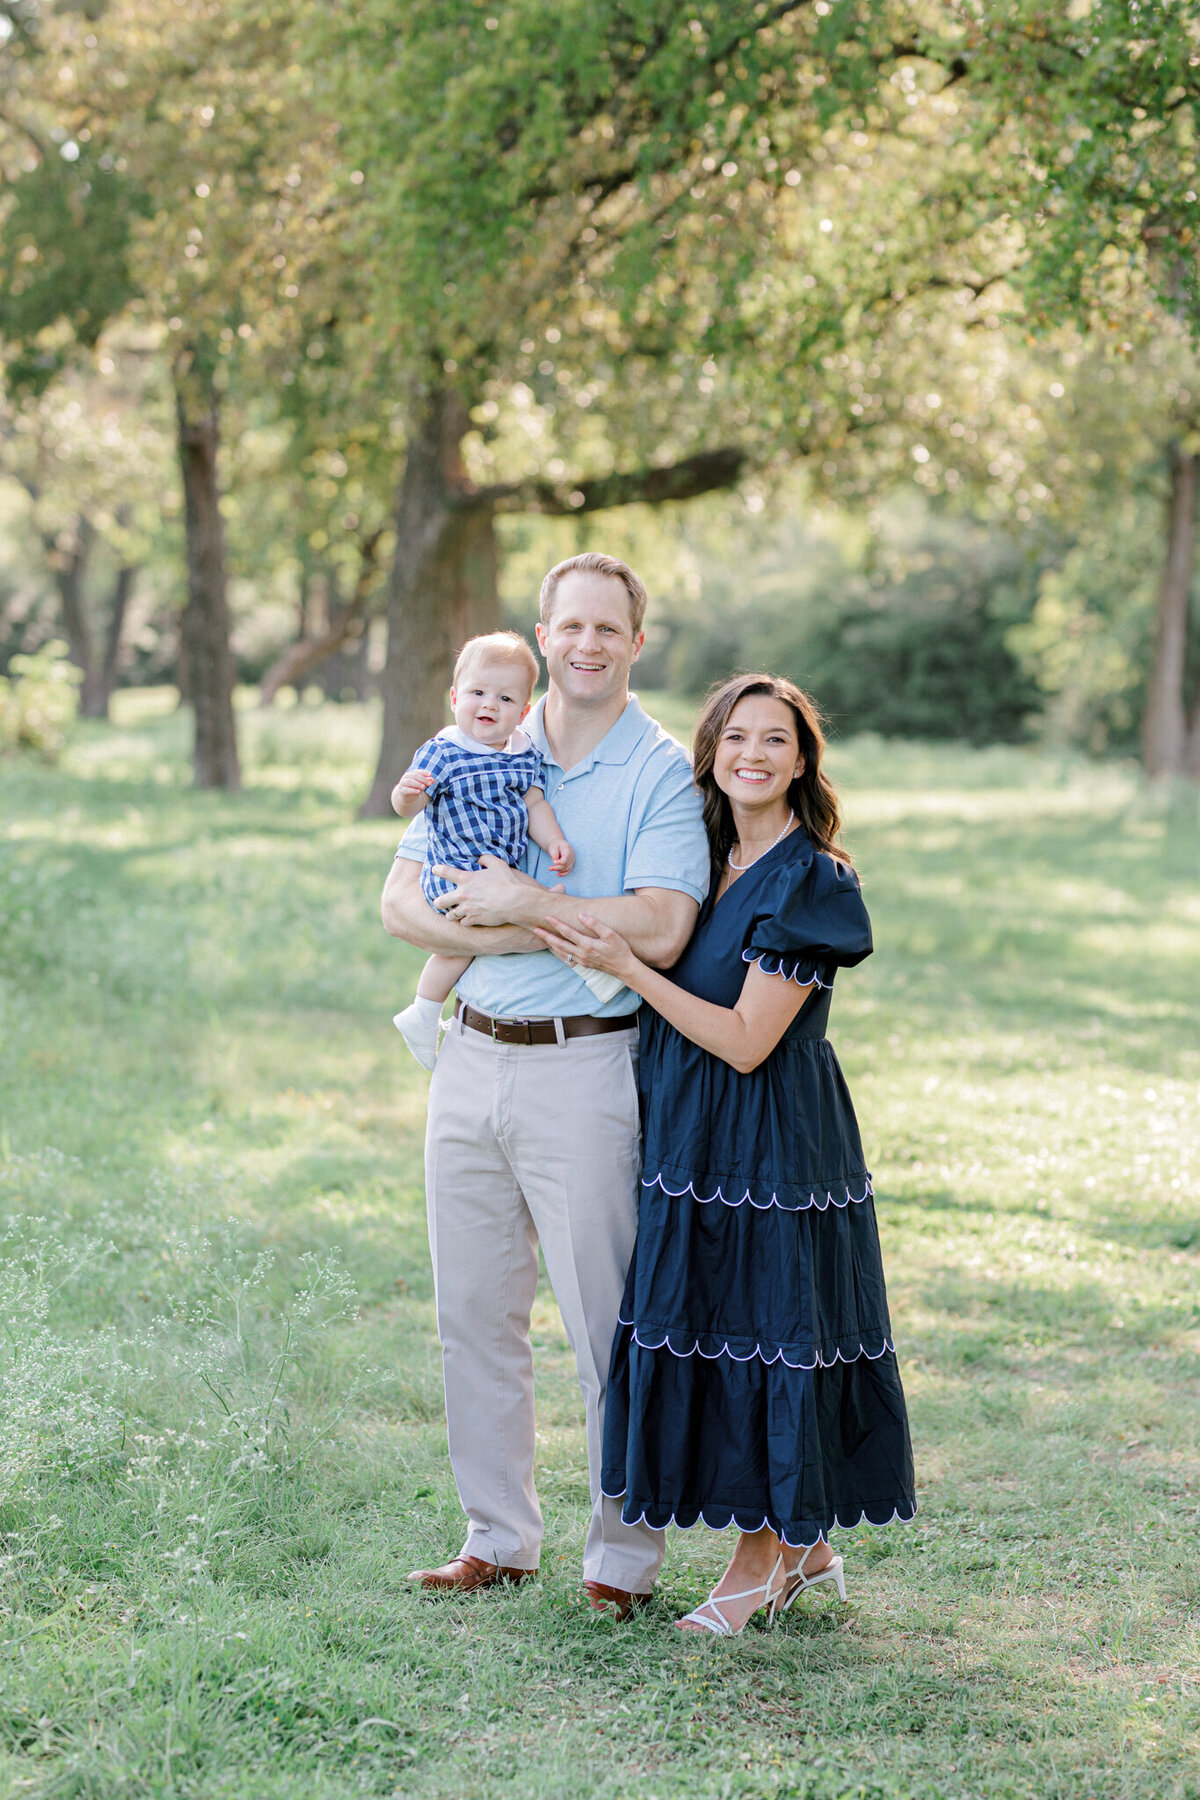 Fall Mini Sessions at Harry Moss Park | Dallas Family Photographer | Sami Kathryn Photography-30